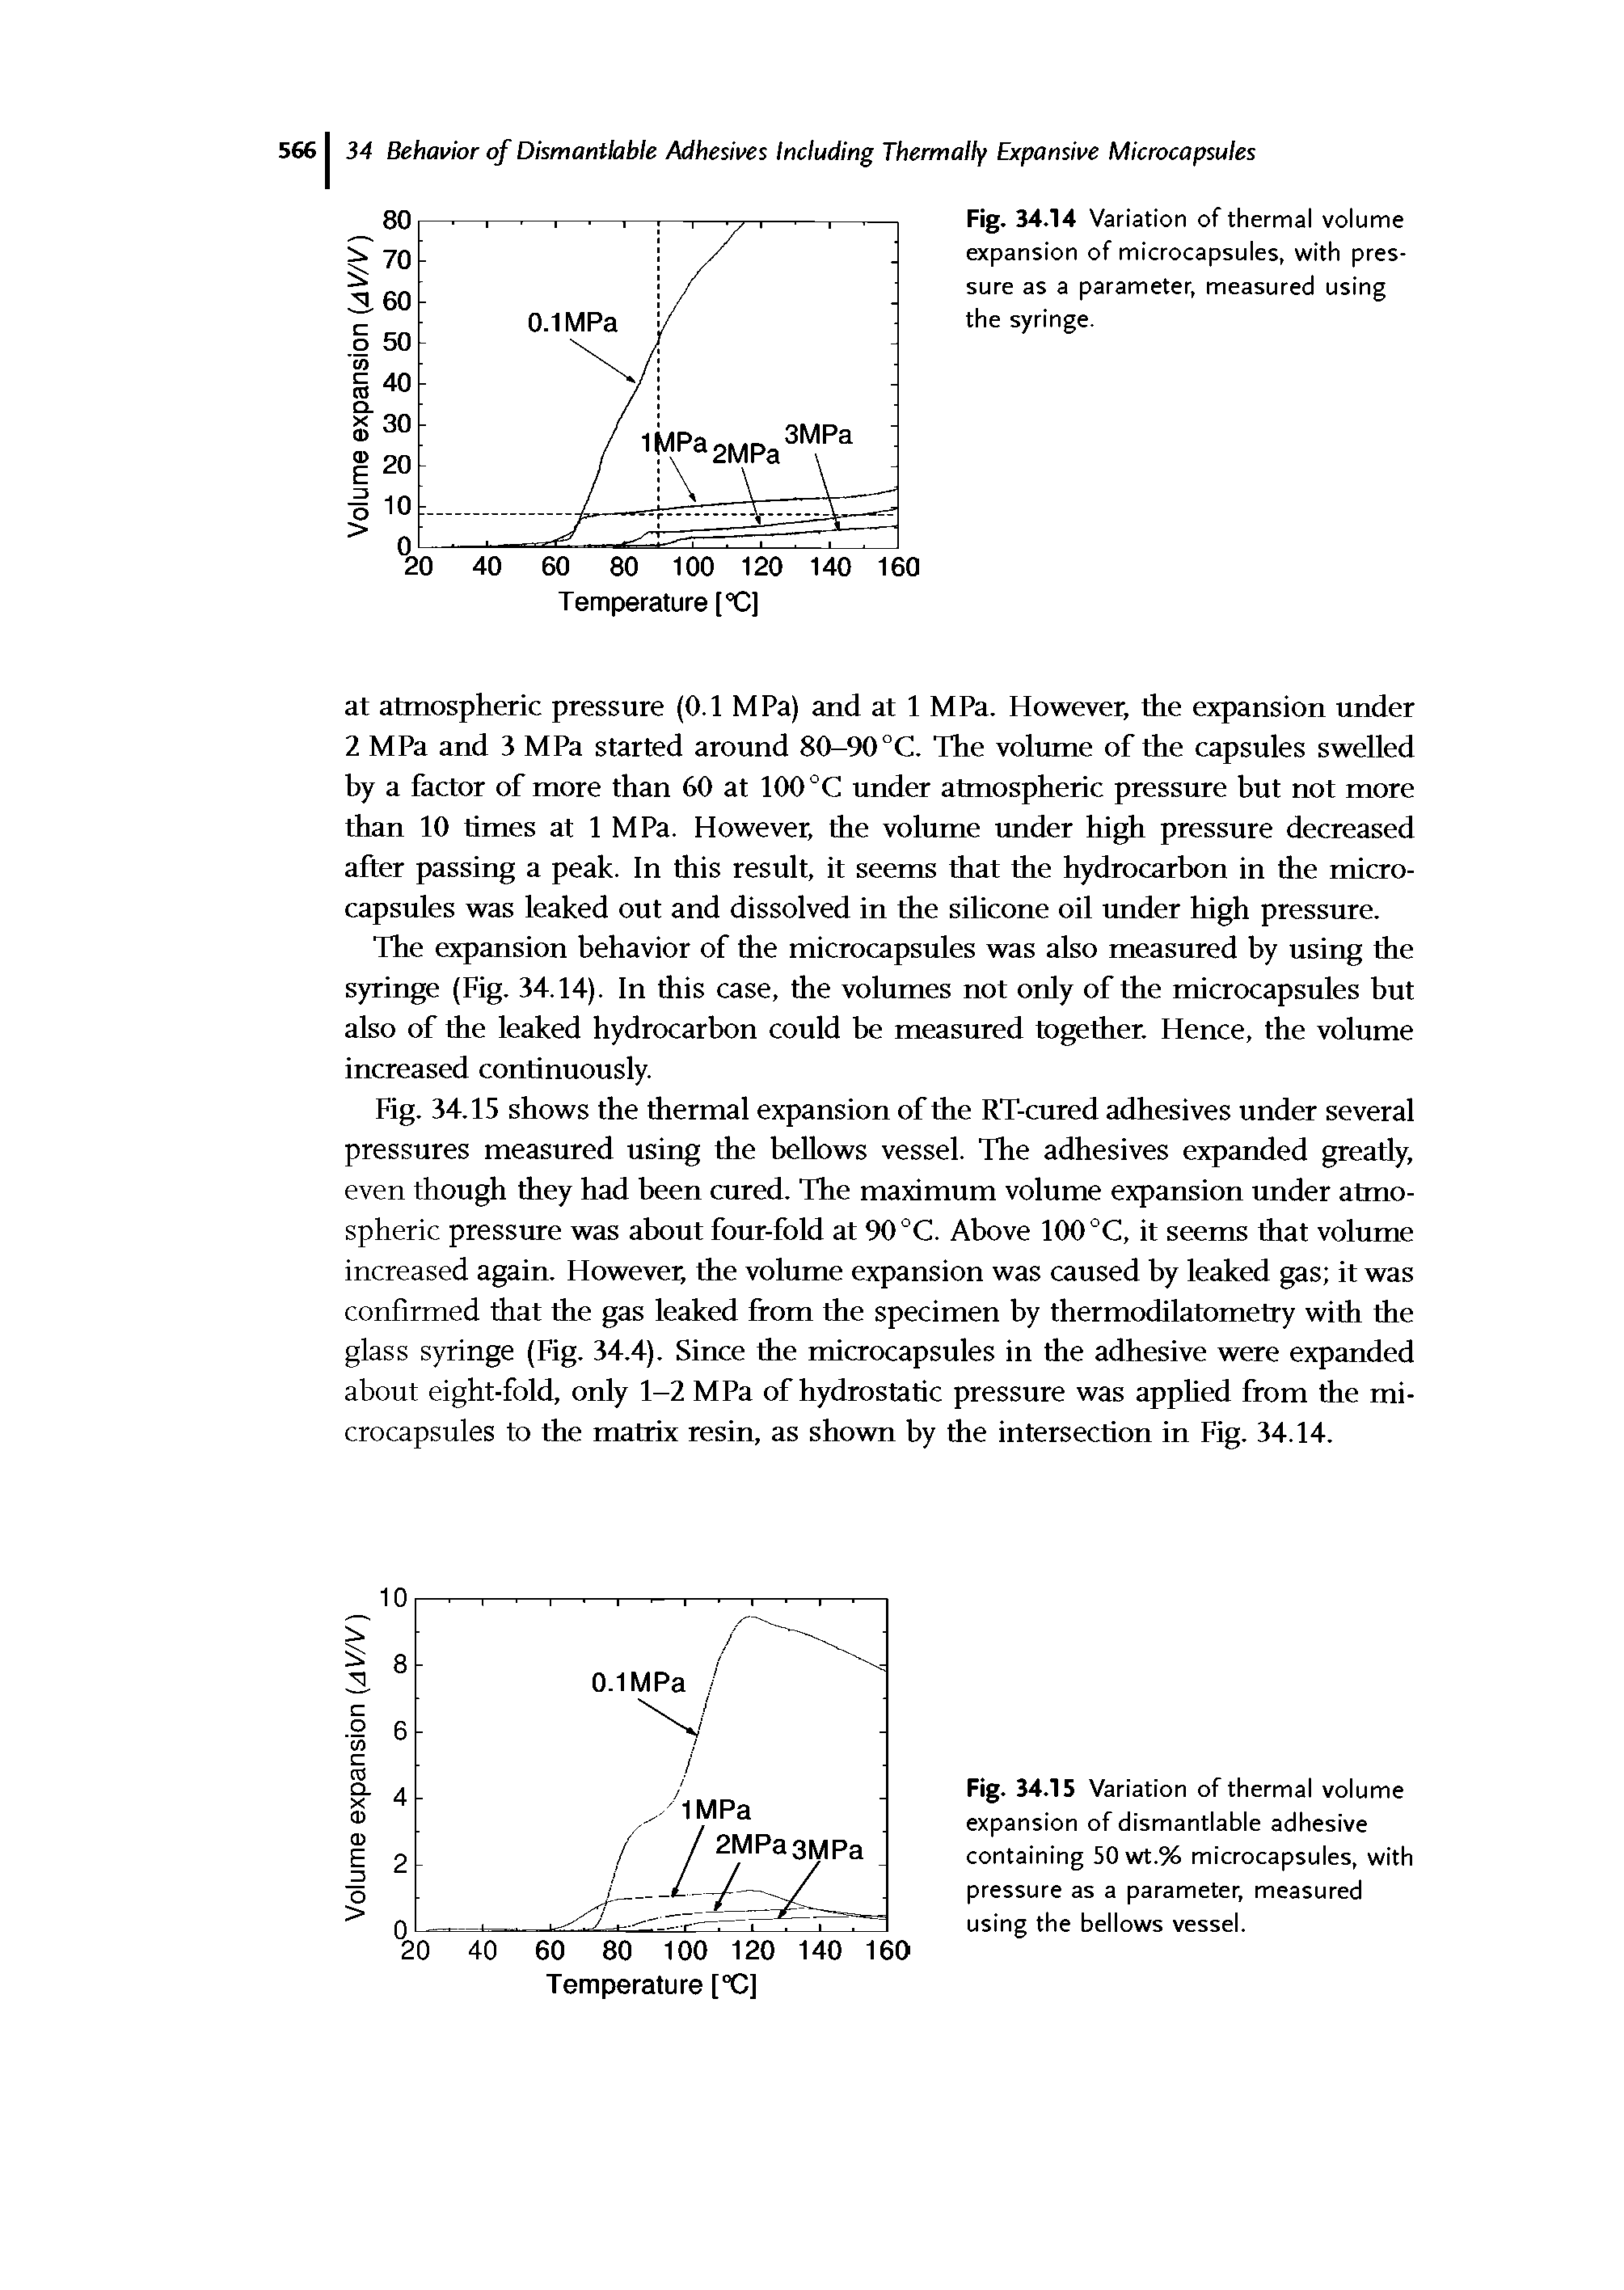 Fig. 34.15 shows the thermal expansion of the RT-cured adhesives under several pressures measured using the bellows vessel. The adhesives expanded greatly, even though they had been cured. The maximum volume expansion under atmospheric pressure was about four-fold at 90 °C. Above 100 °C, it seems that volume increased again. However, the volume expansion was caused by leaked gas it was confirmed that the gas leaked from the specimen by thermodilatometry with the glass syringe (Fig. 34.4). Since the microcapsules in the adhesive were expanded about eight-fold, only 1-2 MPa of hydrostatic pressure was apphed from the microcapsules to the matrix resin, as shown by the intersection in Fig. 34.14.